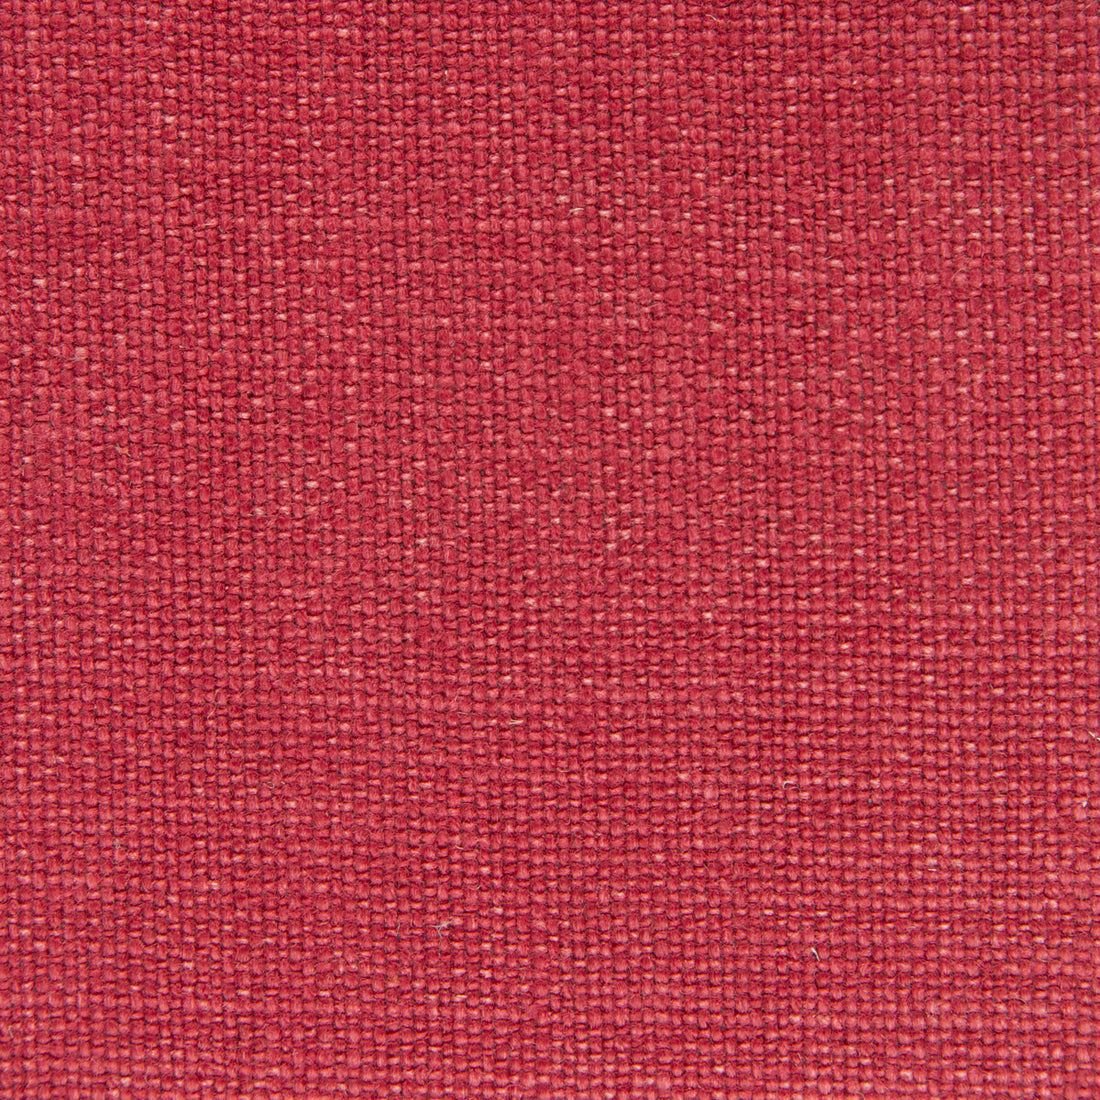 Nicaragua fabric in rojo color - pattern GDT5239.007.0 - by Gaston y Daniela in the Basics collection